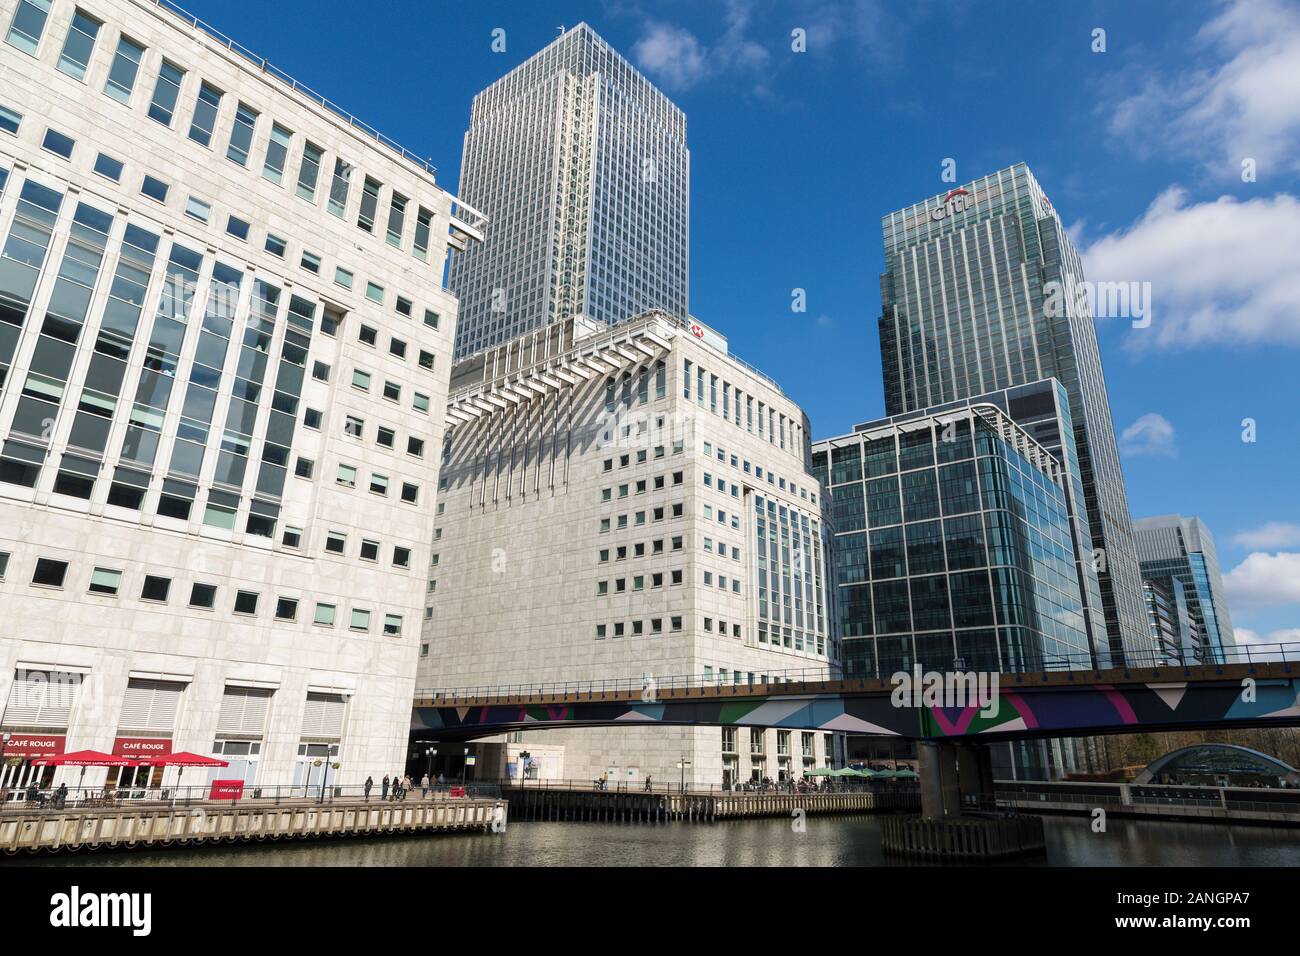 Canary Wharf business district banche, Londra, Inghilterra Foto Stock